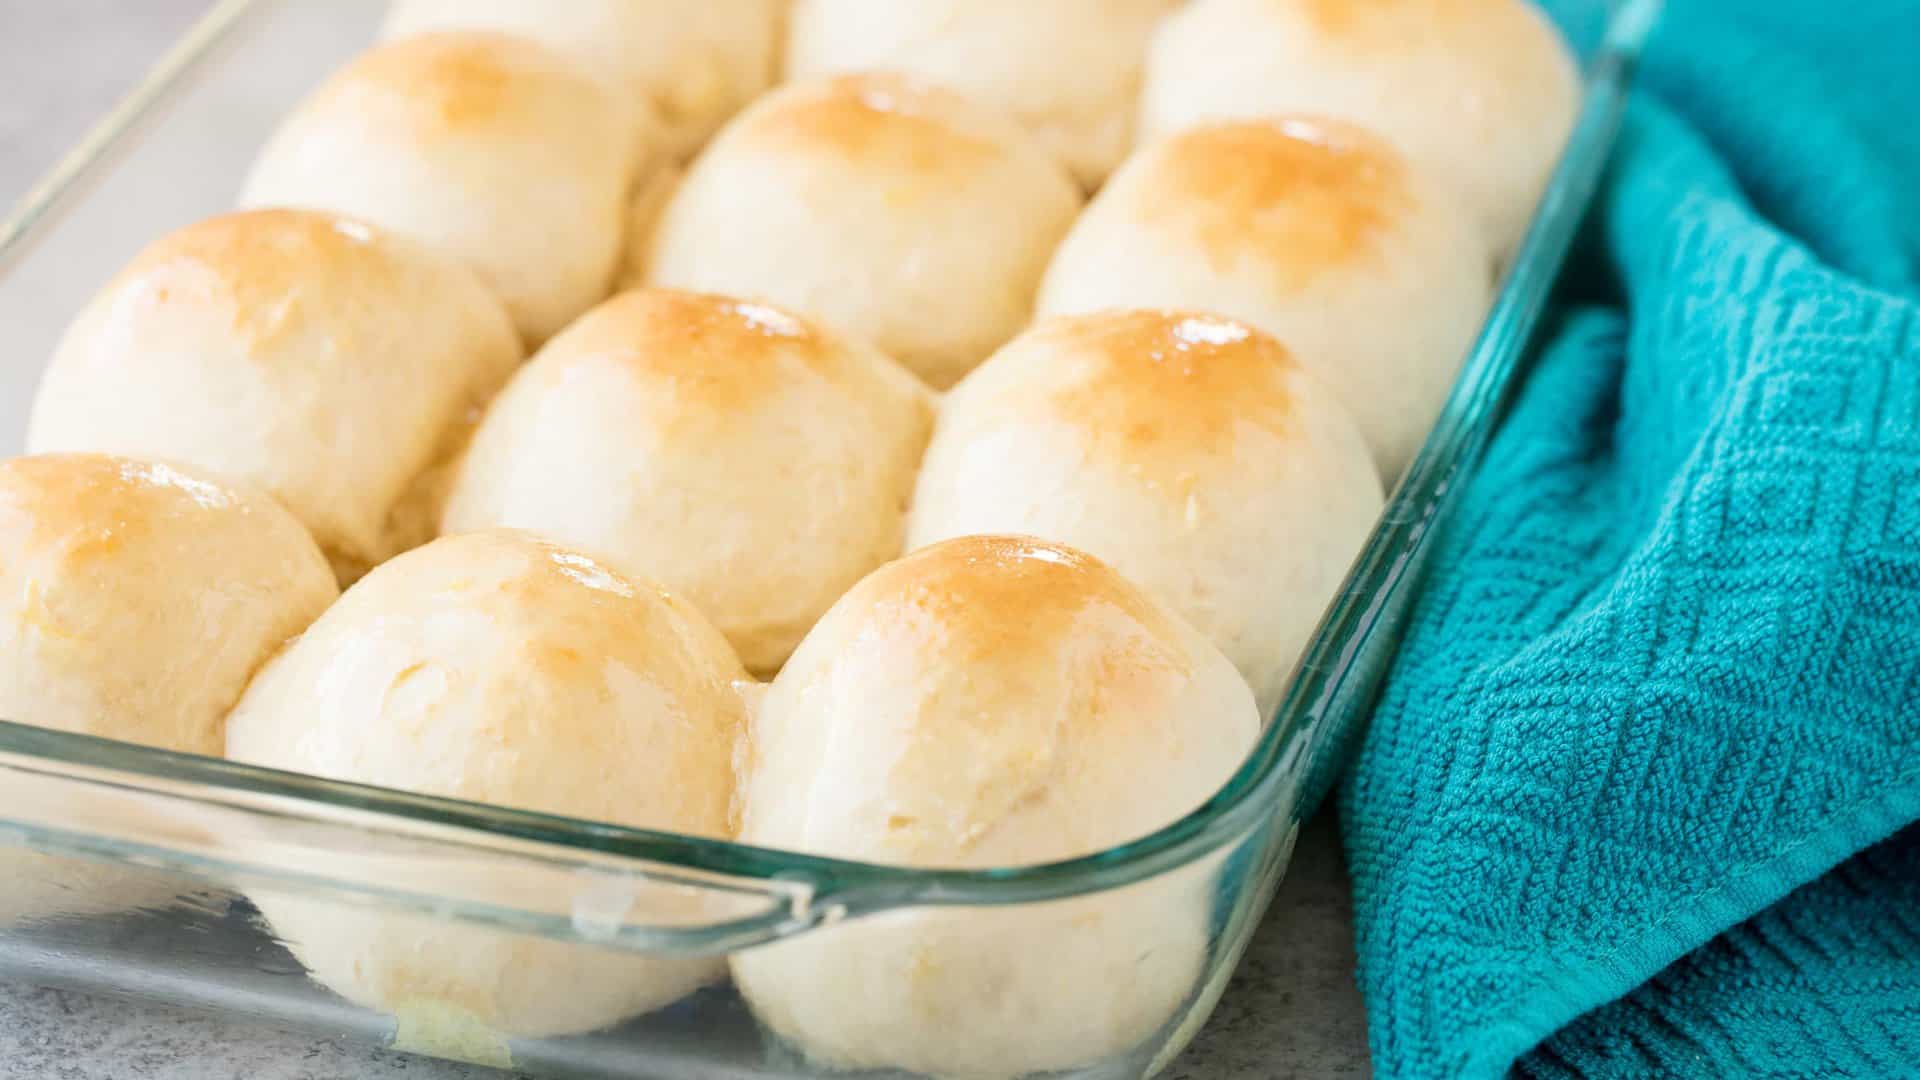 Learn how to make Homemade Hawaiian Sweet Rolls that are soft, fluffy, and totally easy to make. These sweet rolls will be an instant family favorite!